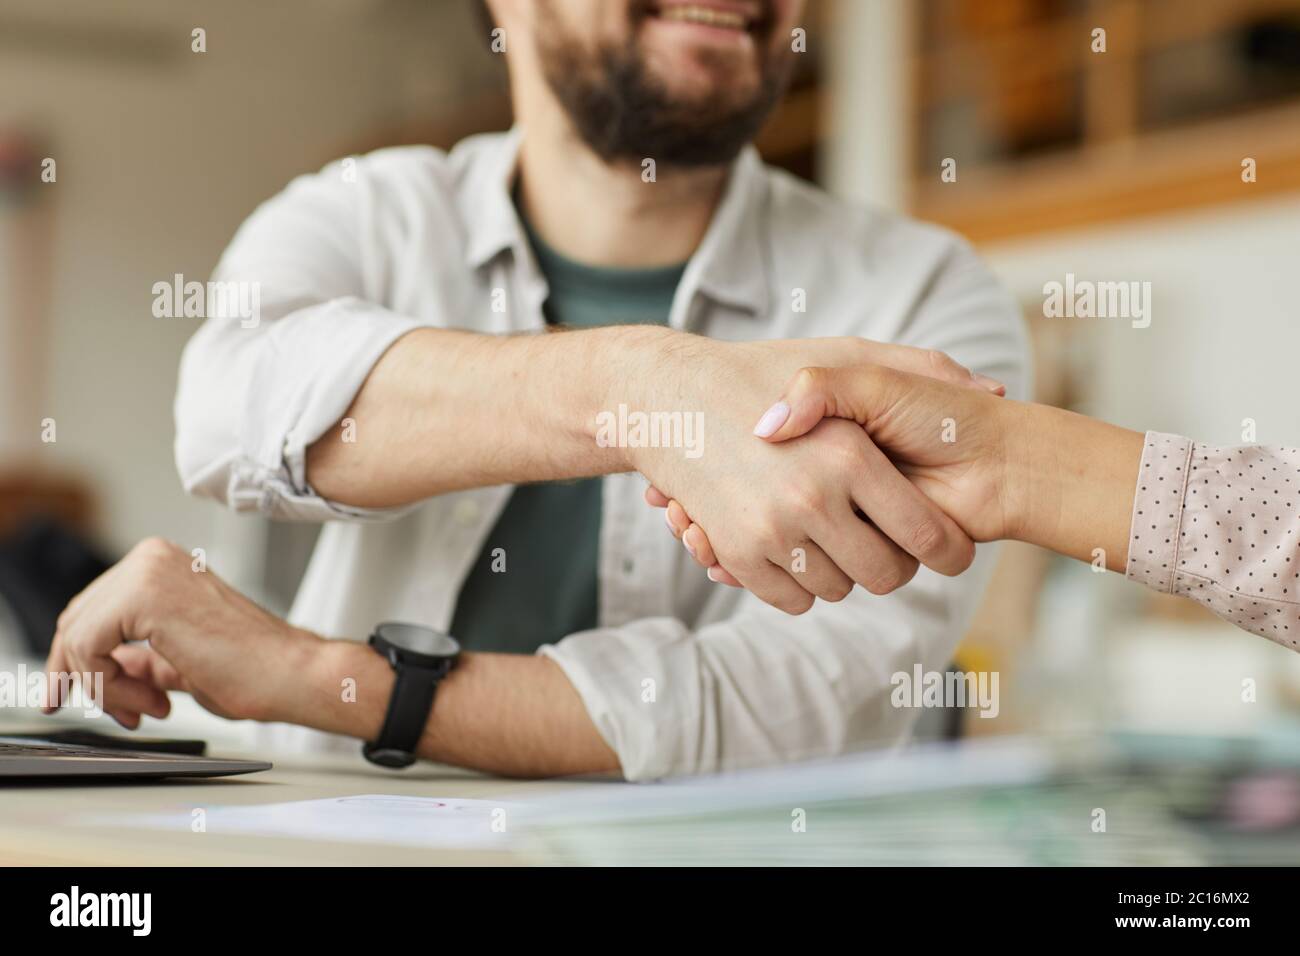 Close Up Of Smiling Bearded Man Shaking Hands With Colleague In Minimal Office Setting Copy